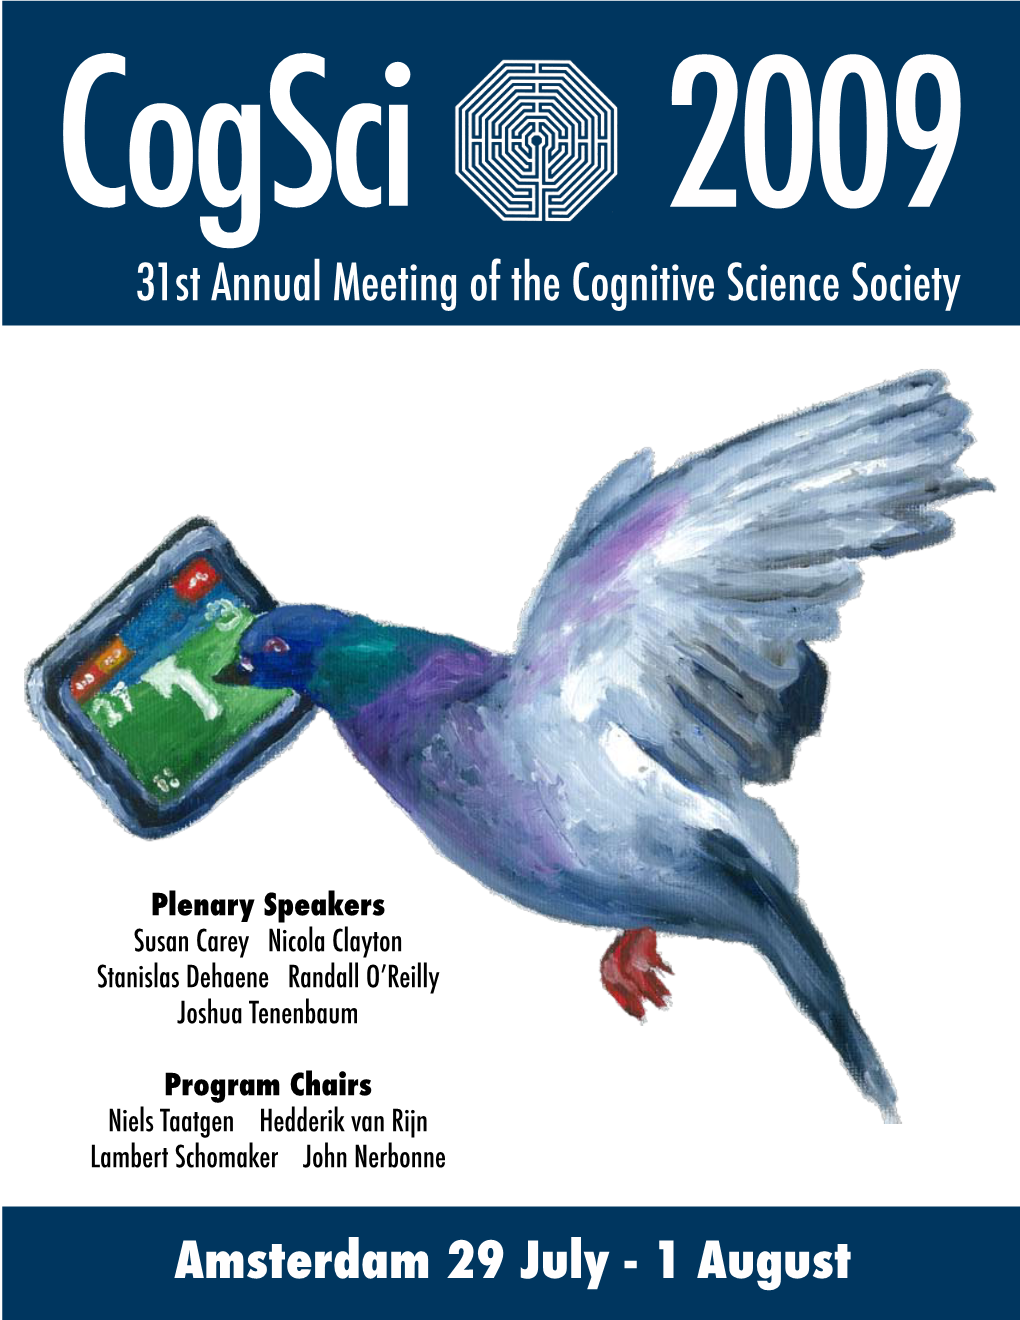 31St Annual Meeting of the Cognitive Science Society Amsterdam 29 July